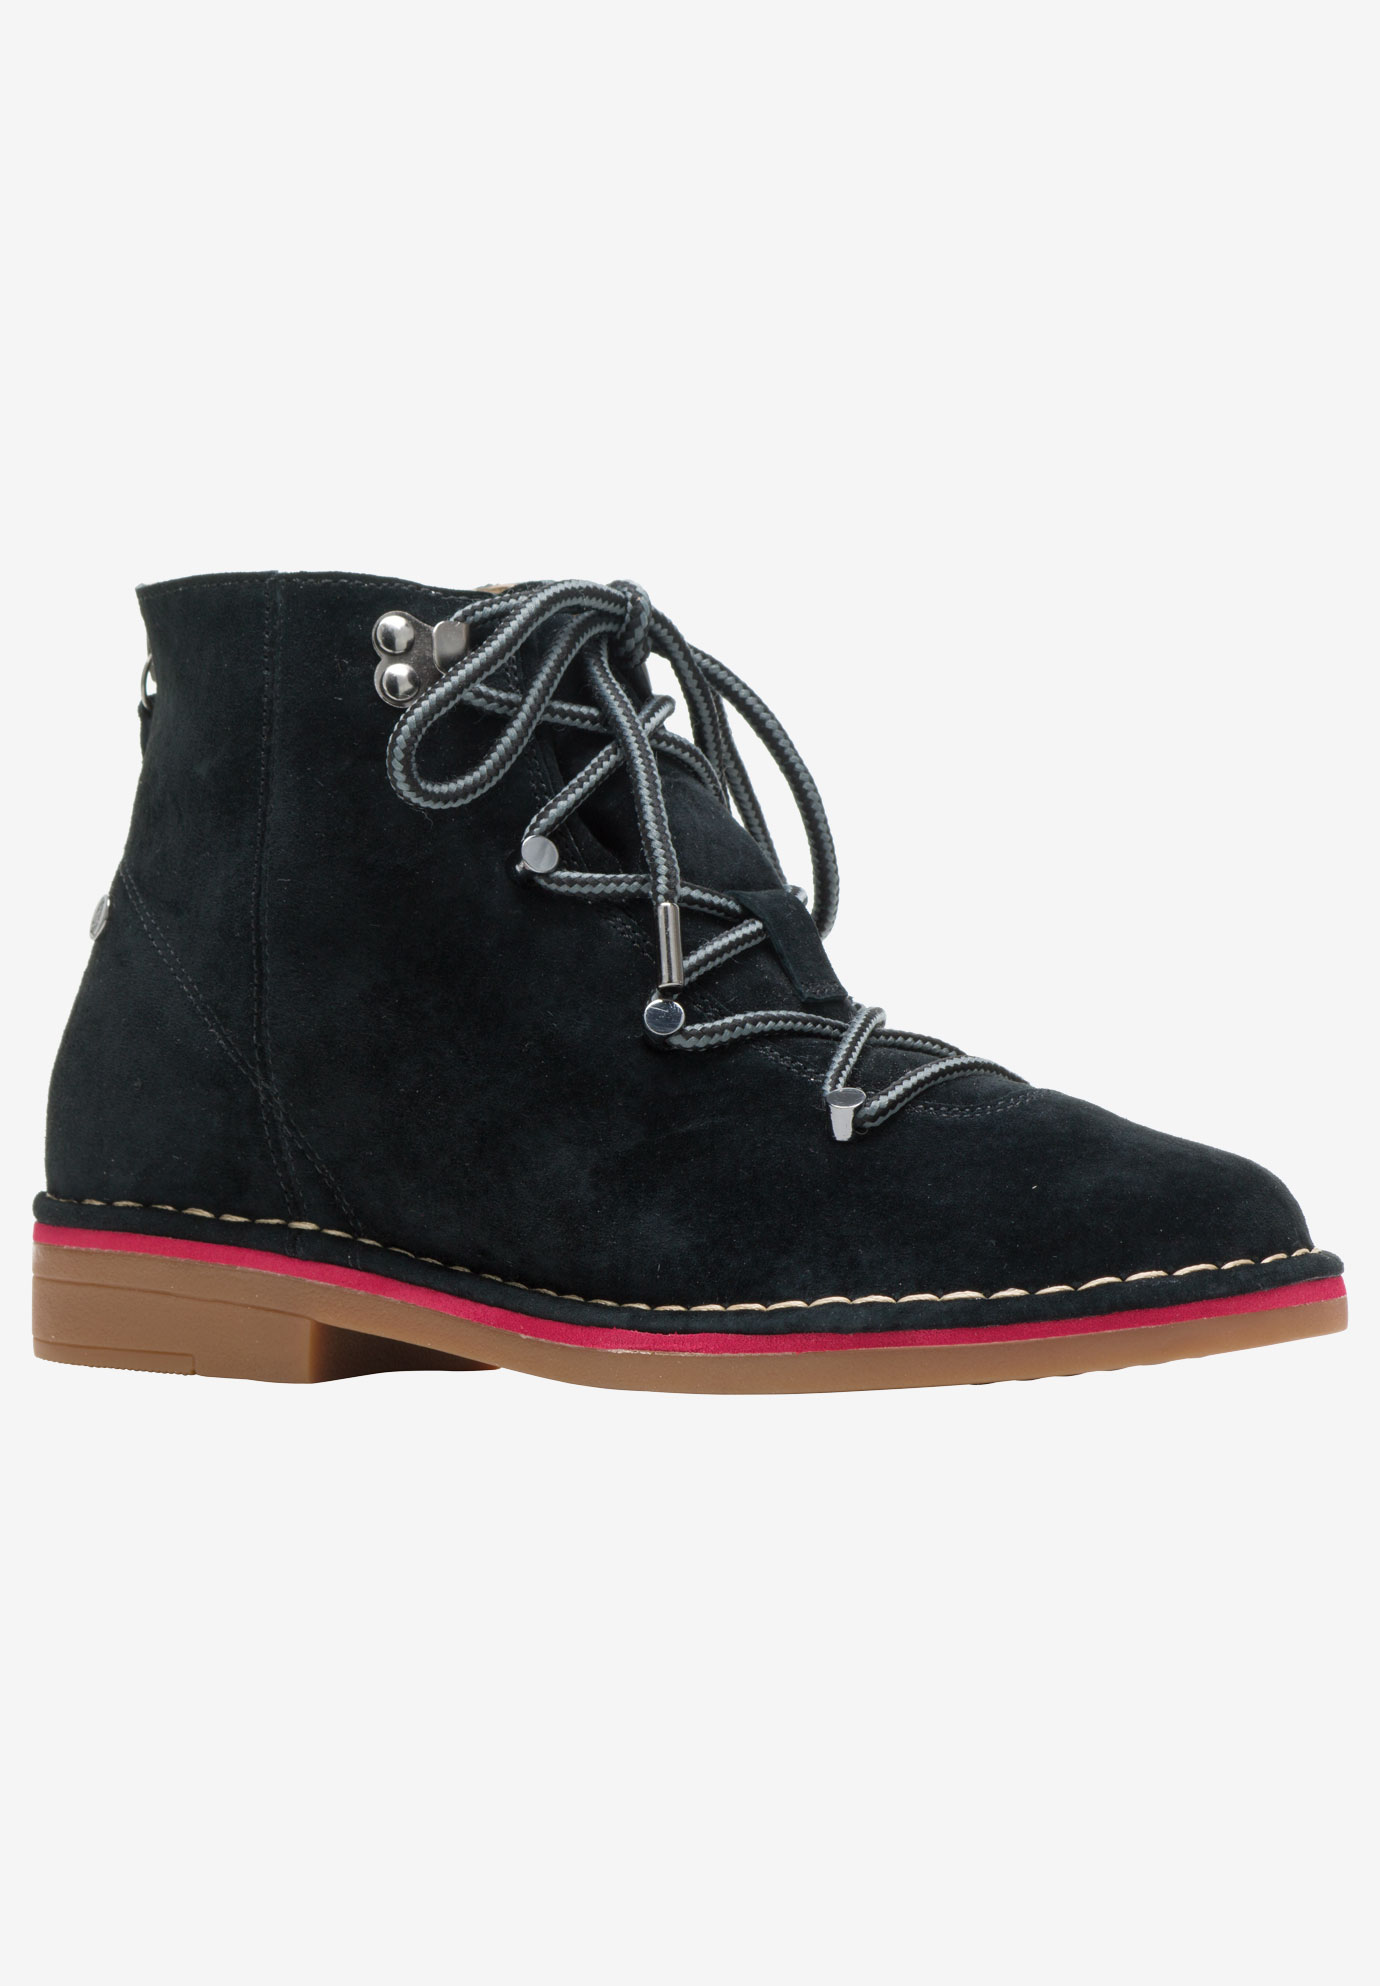 hush puppies catelyn hiker boot